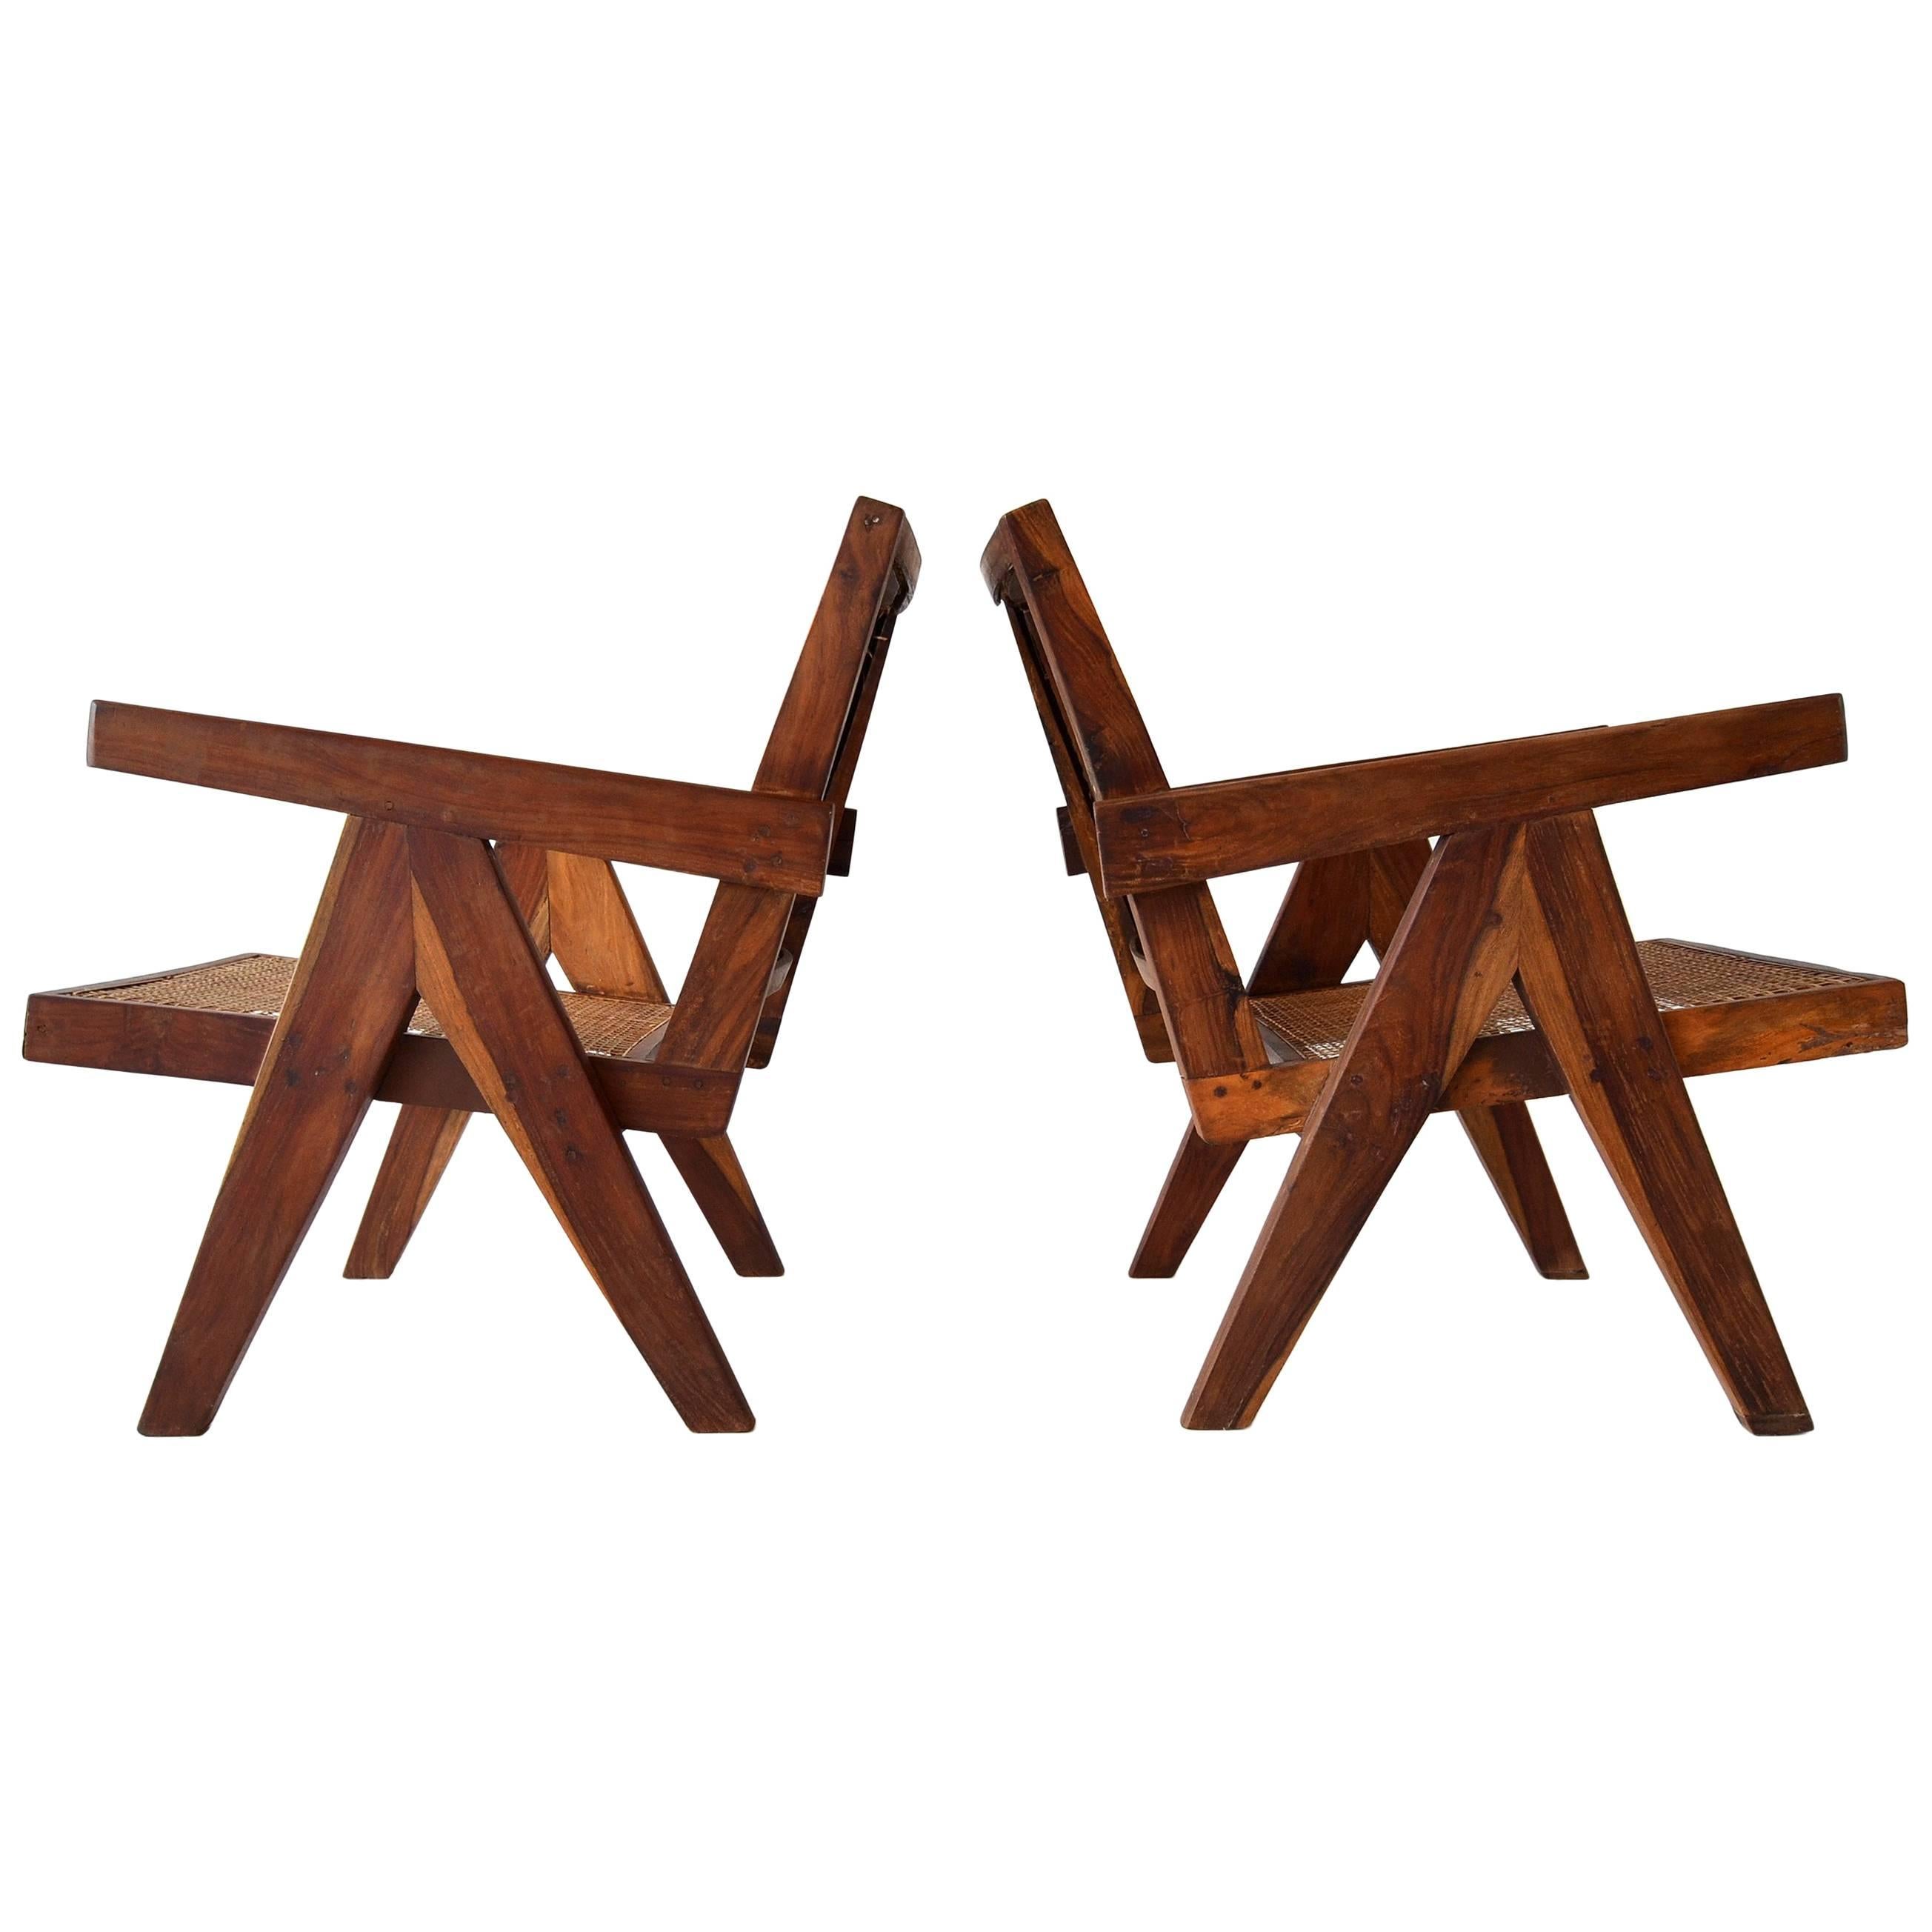 Pair of Pierre Jeanneret PJ-SI-29-A Low Chairs in Sissoo Rosewood, circa 1955